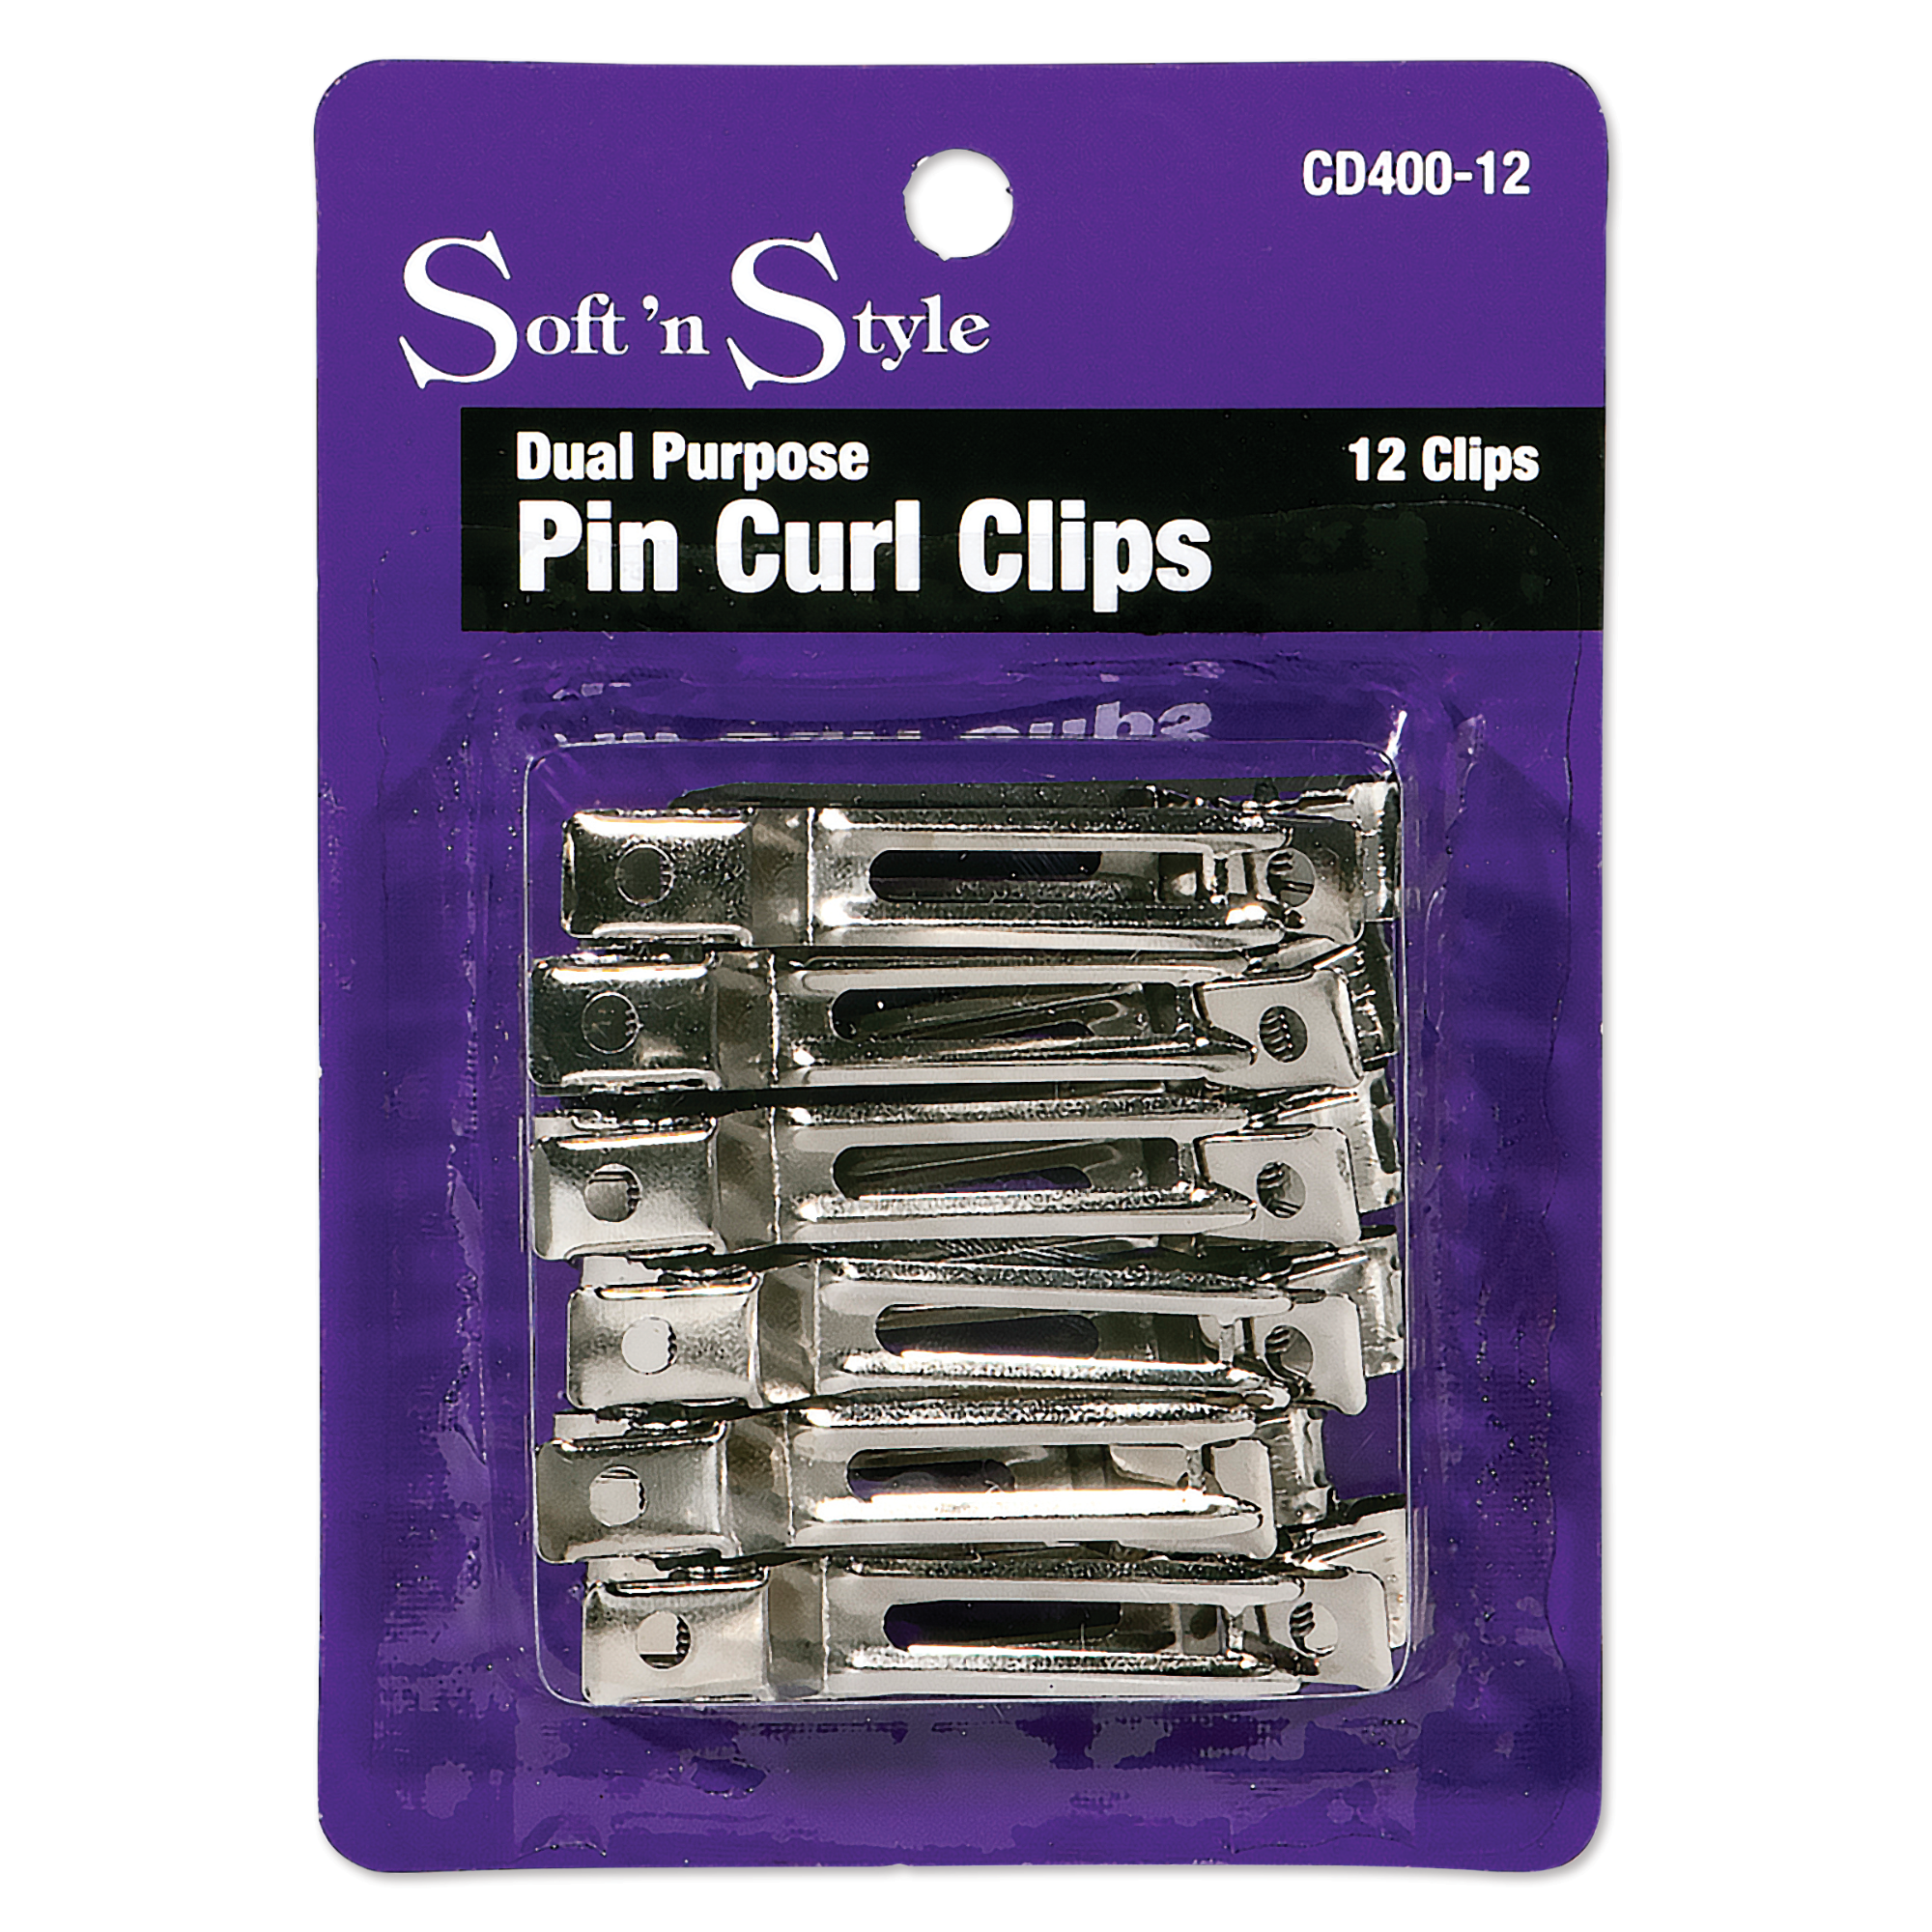 Double Prong Slide Pin Curl Clips, 12 per card